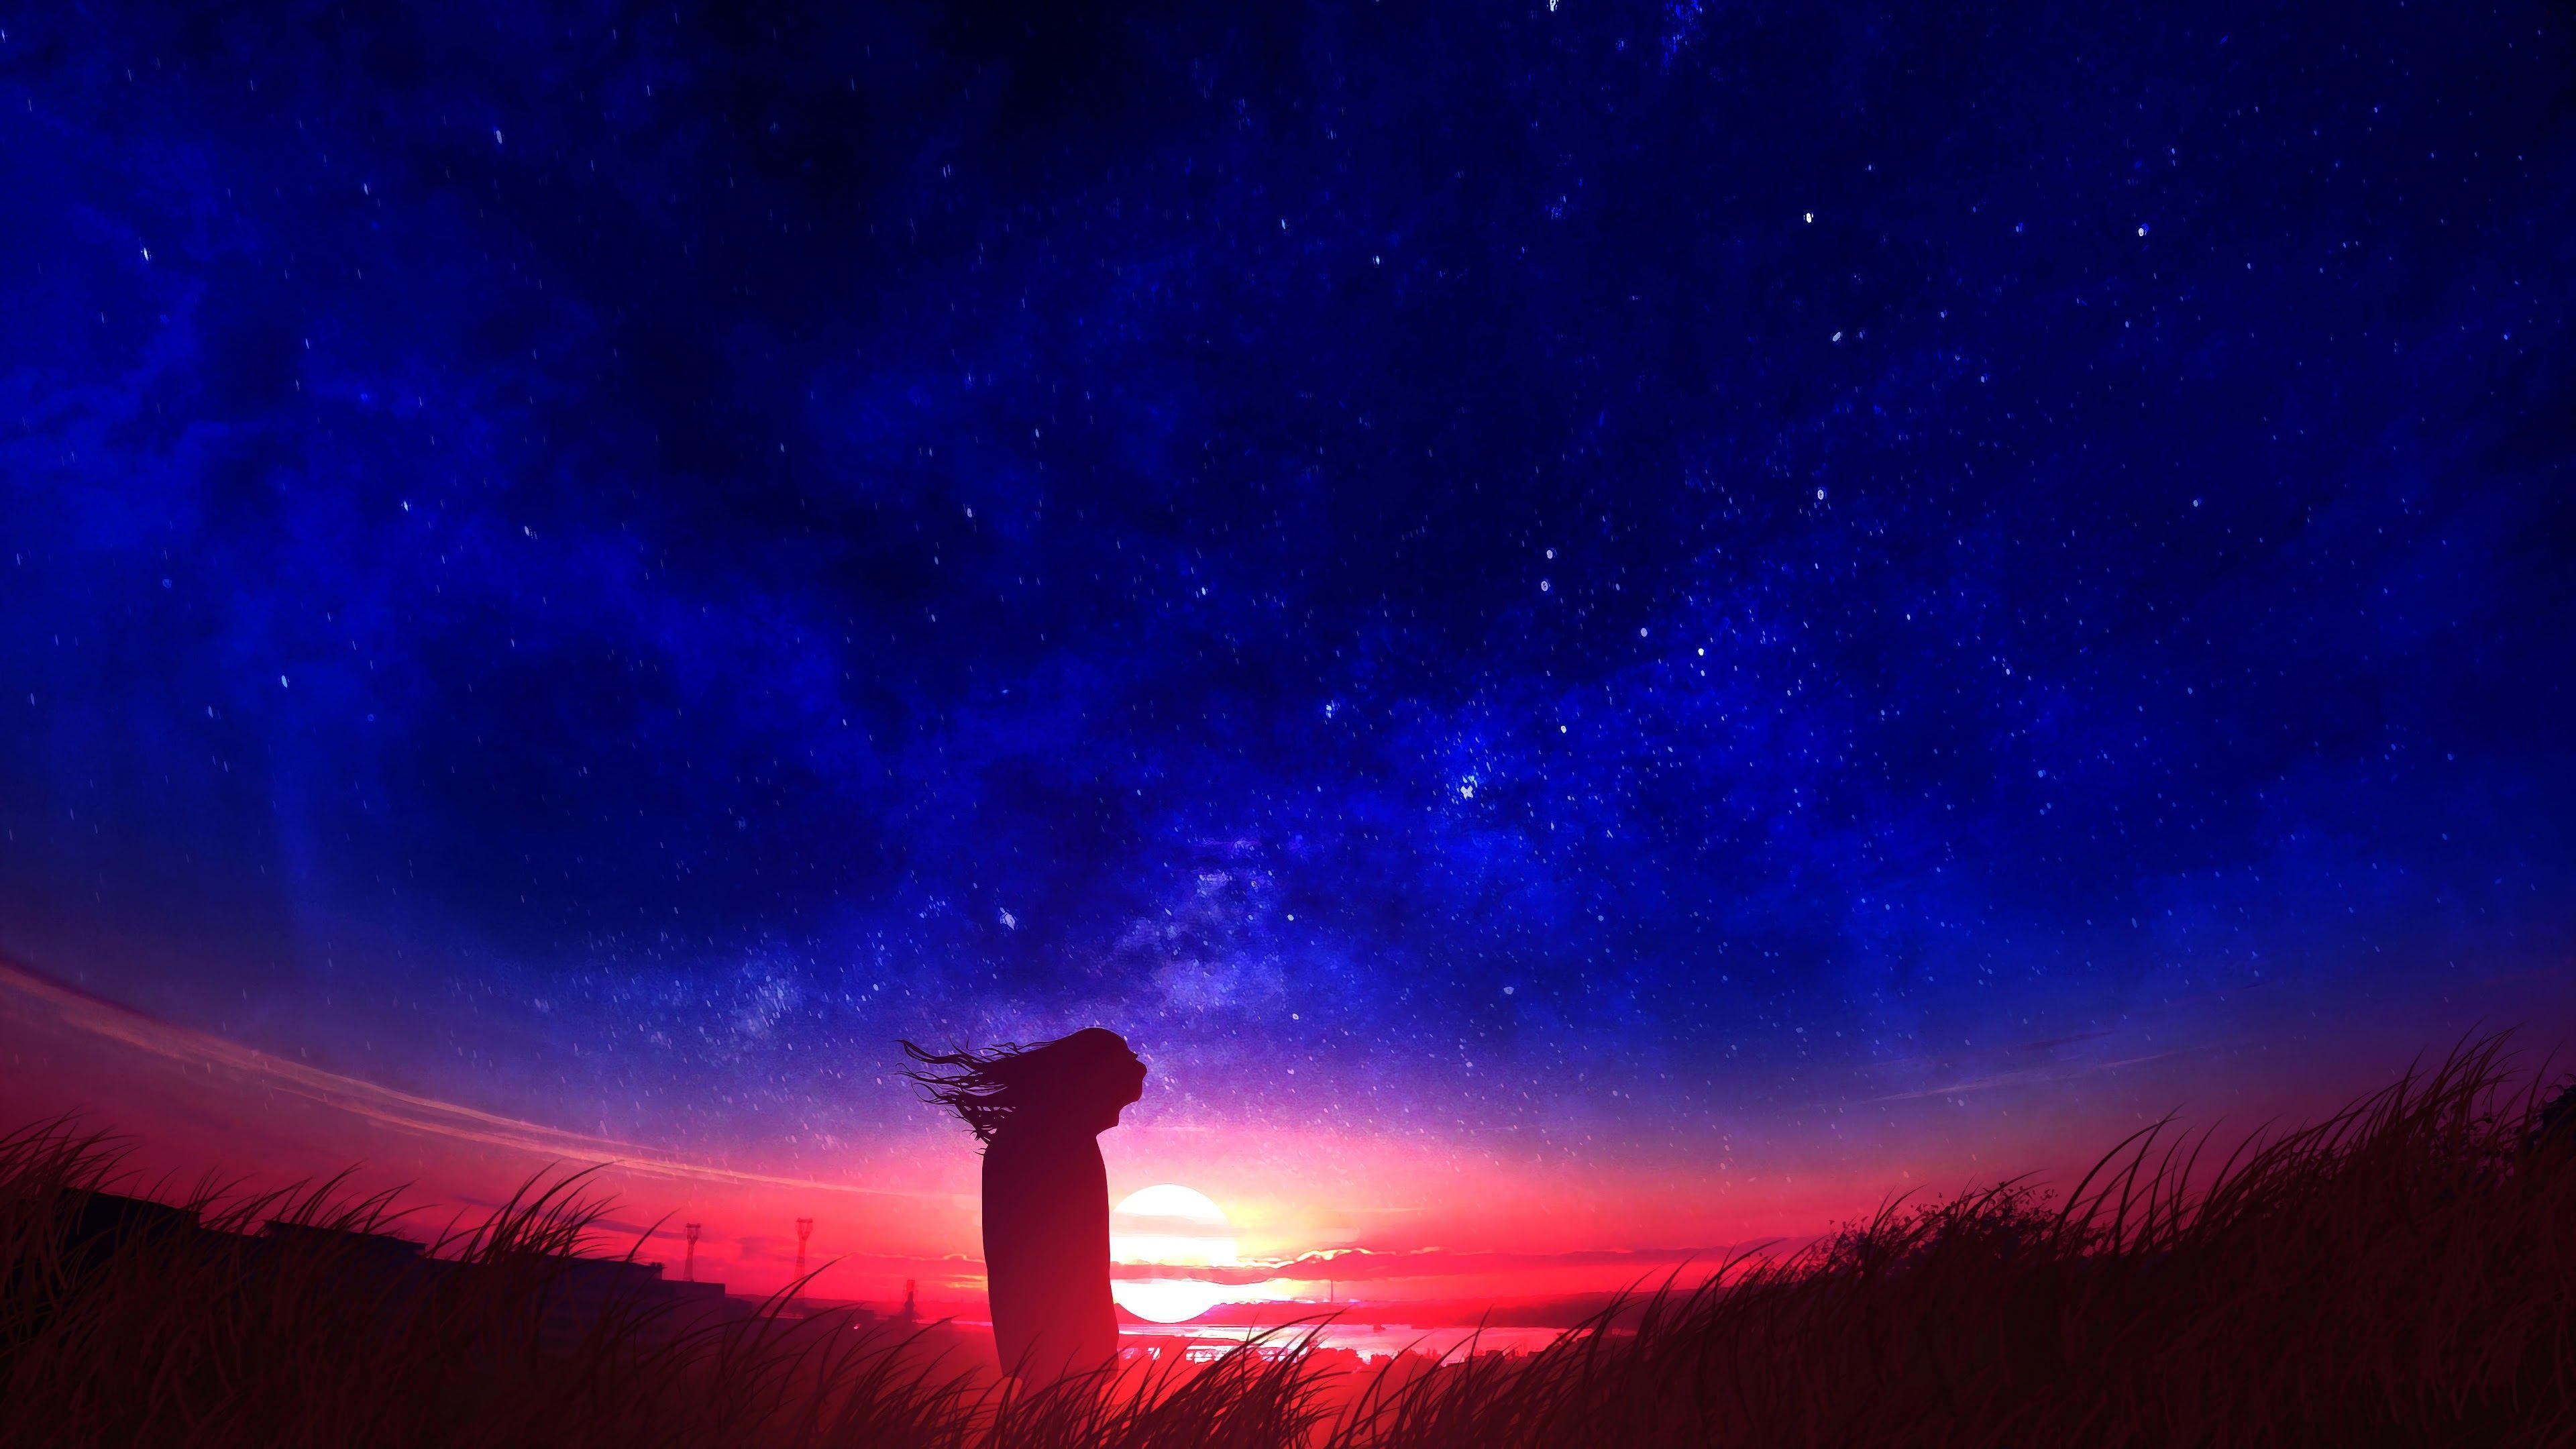 4K Anime Sunset Wallpapers - Top Free 4K Anime Sunset Backgrounds